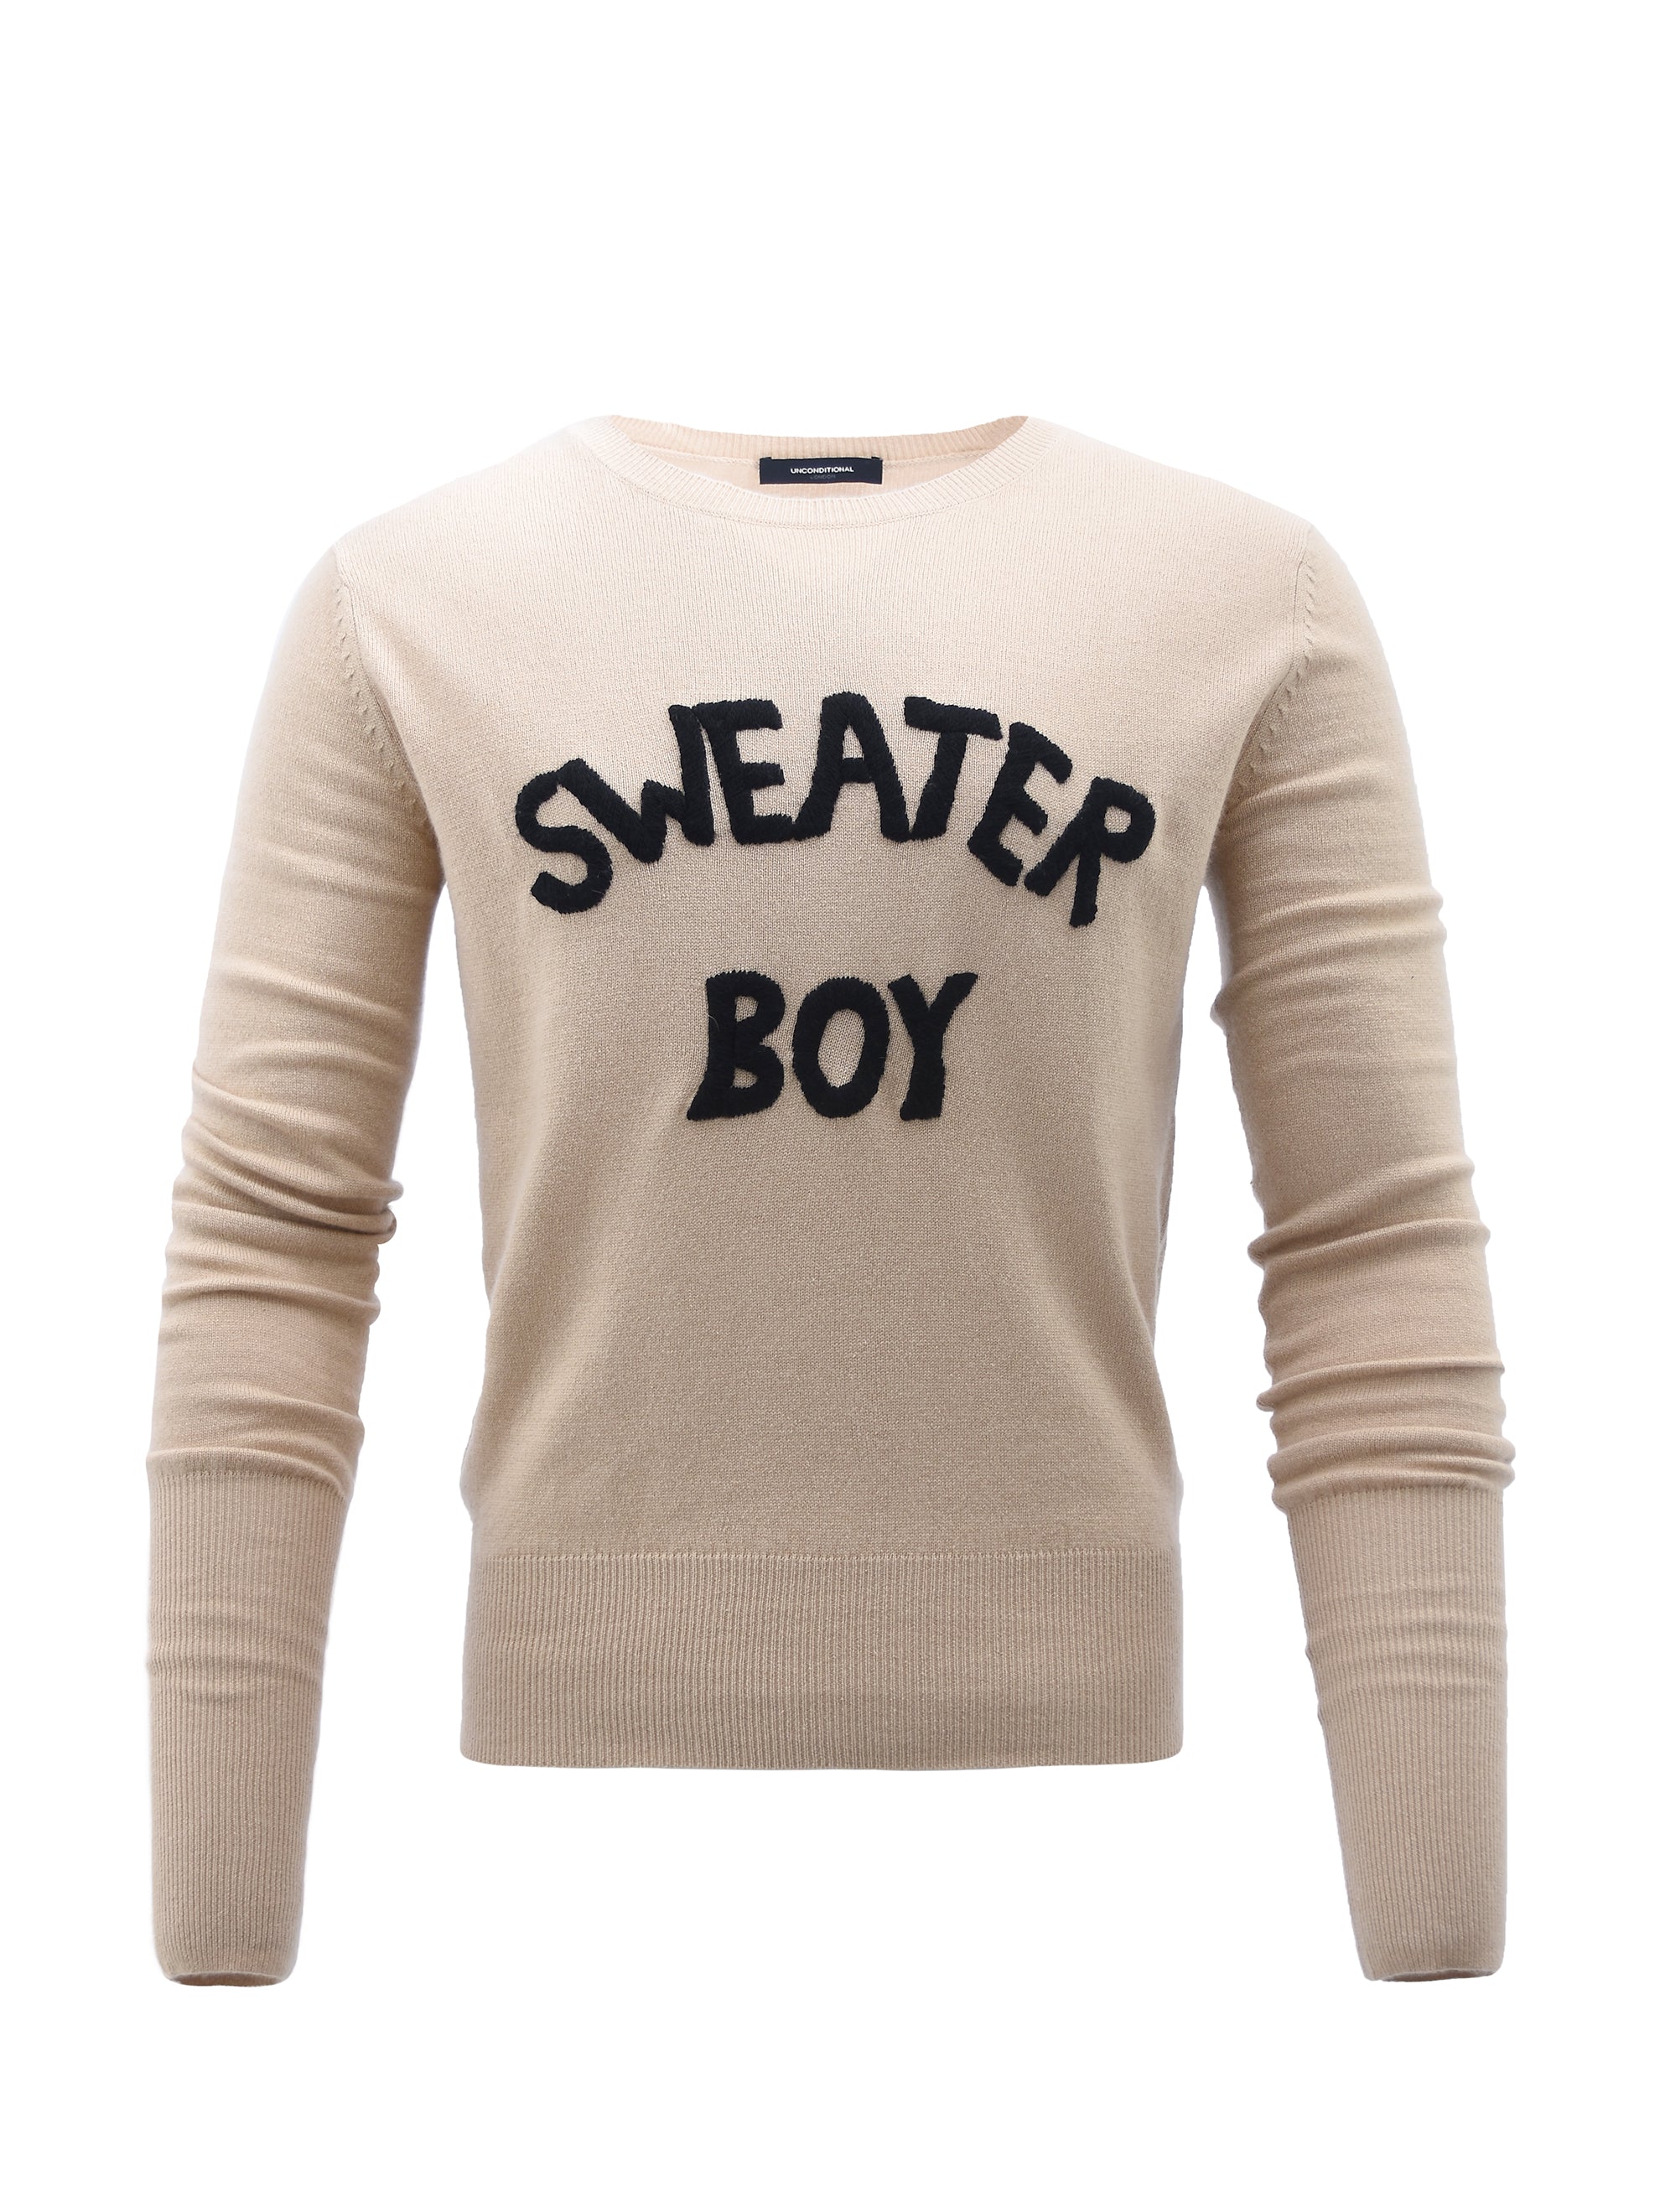 SAND AND BLACK SWEATER BOY JUMPER